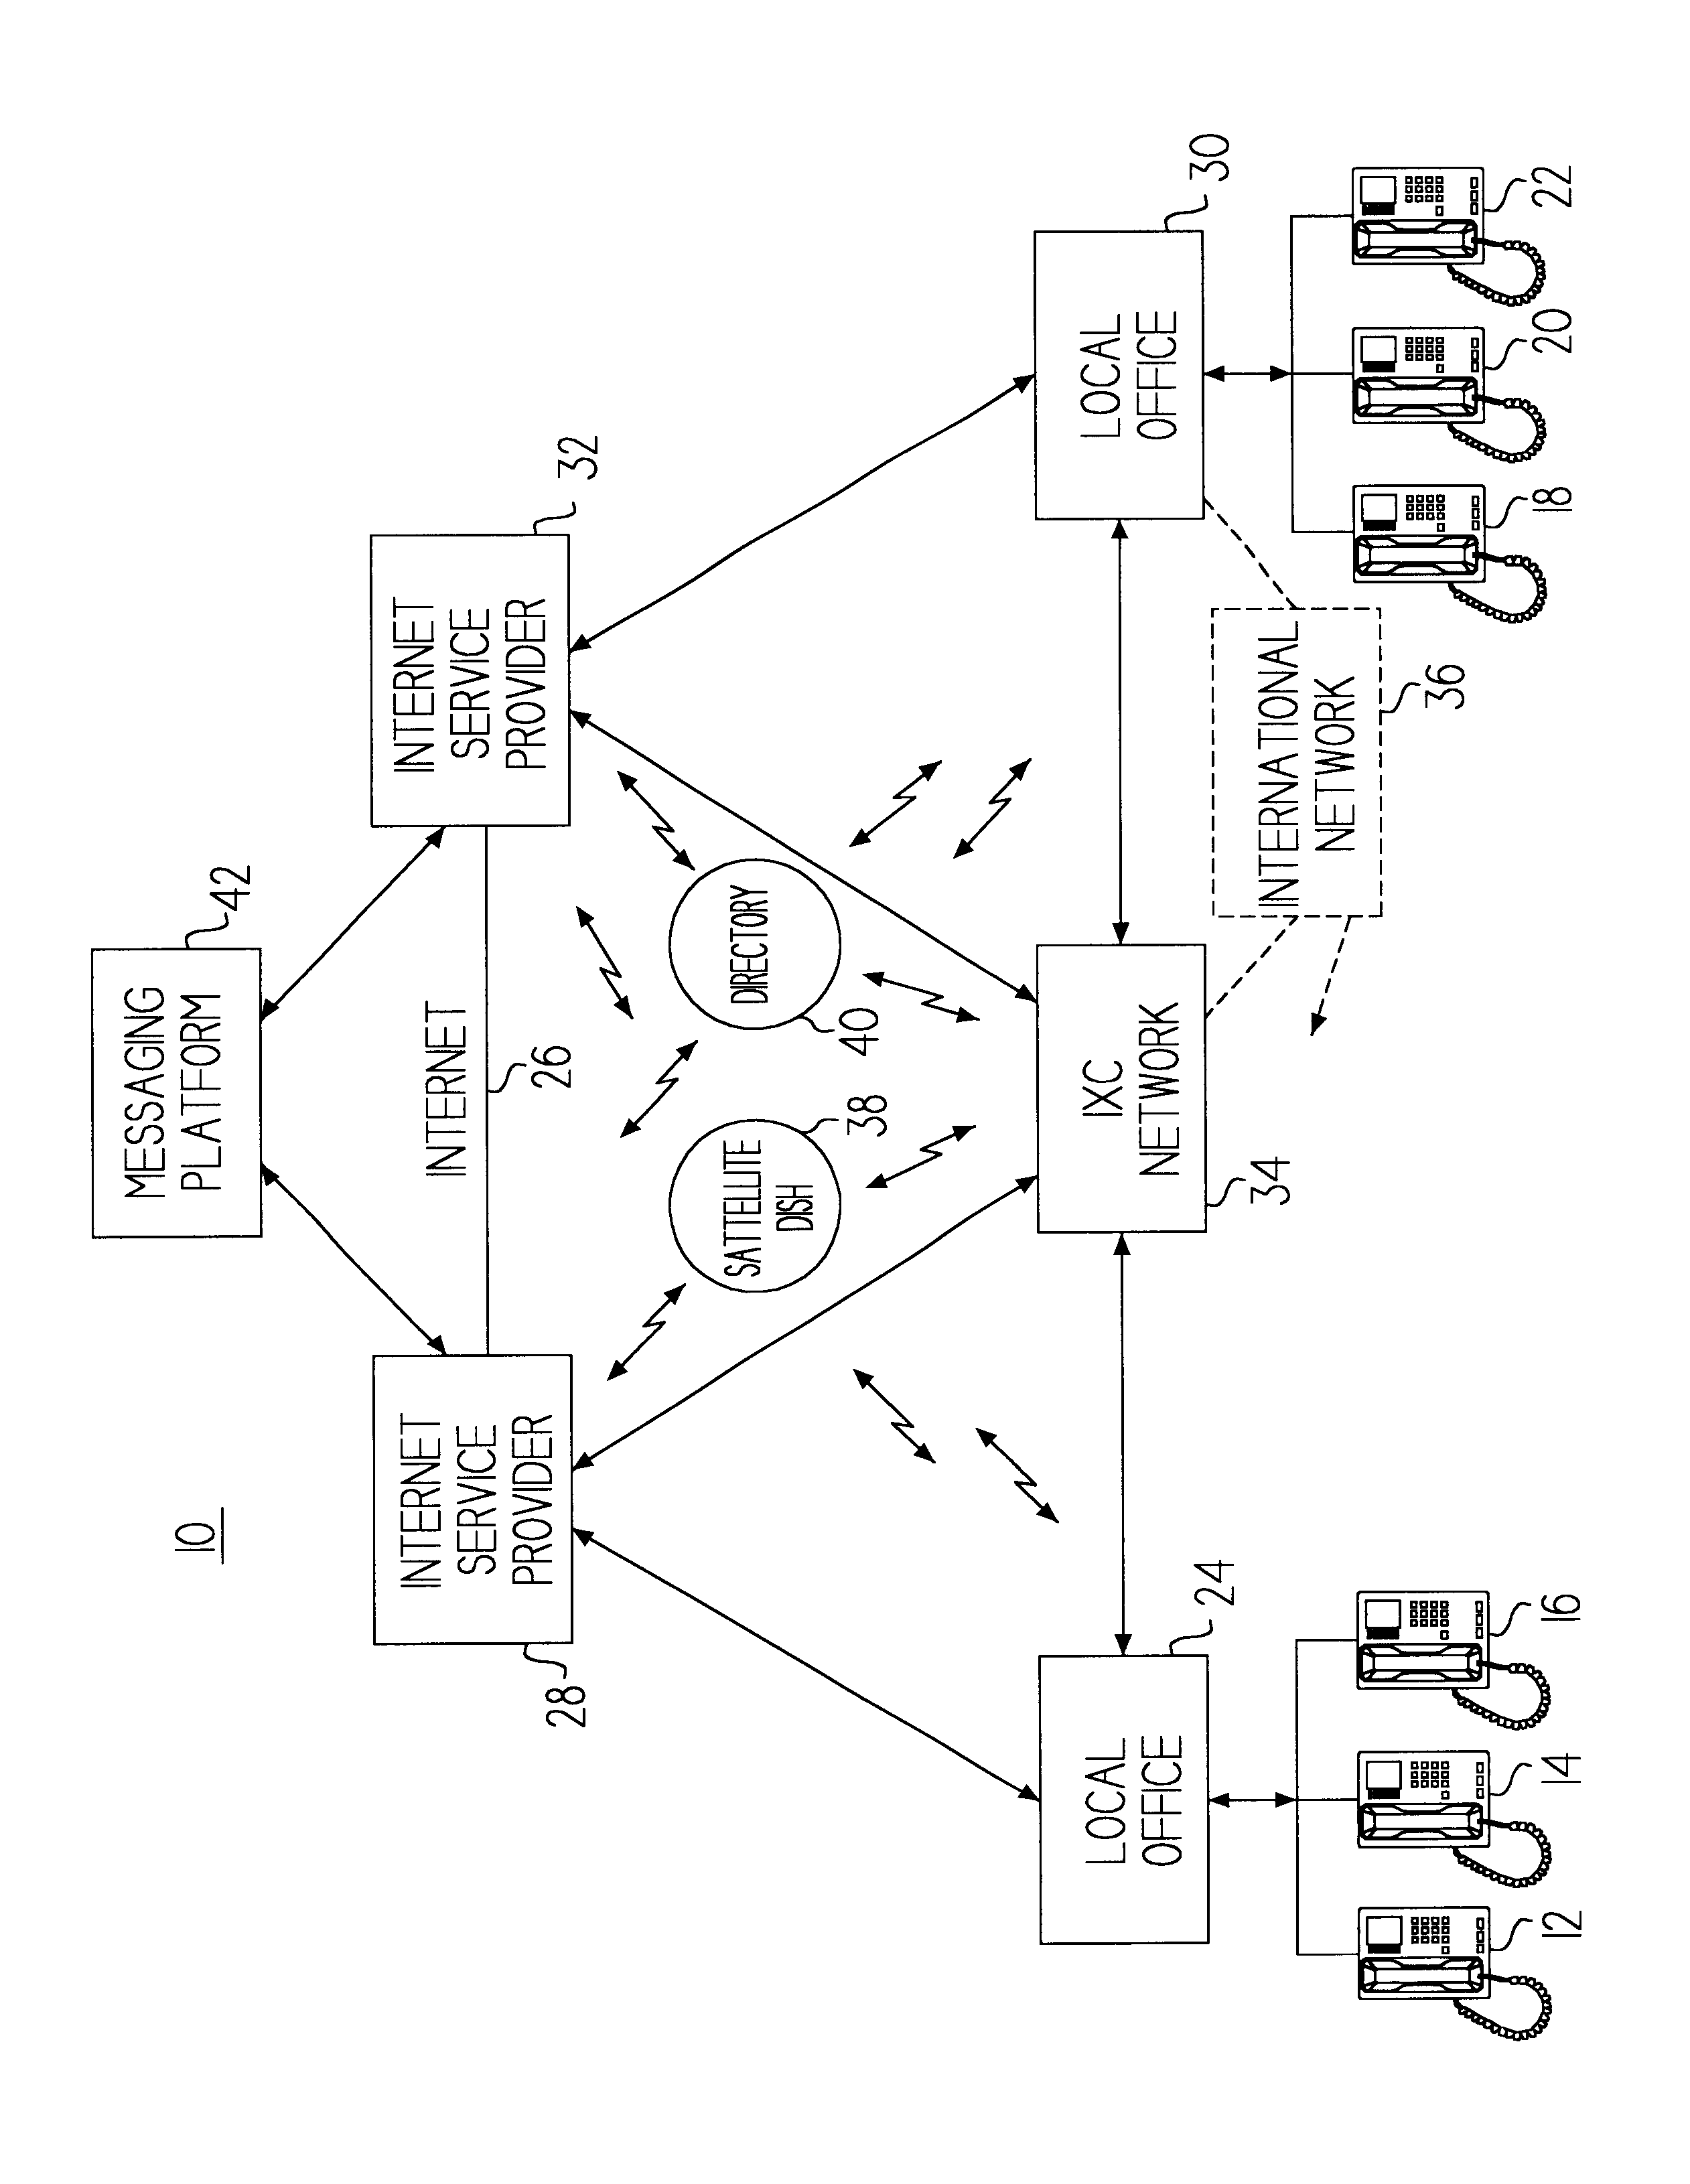 Method for completing internet telephony calls